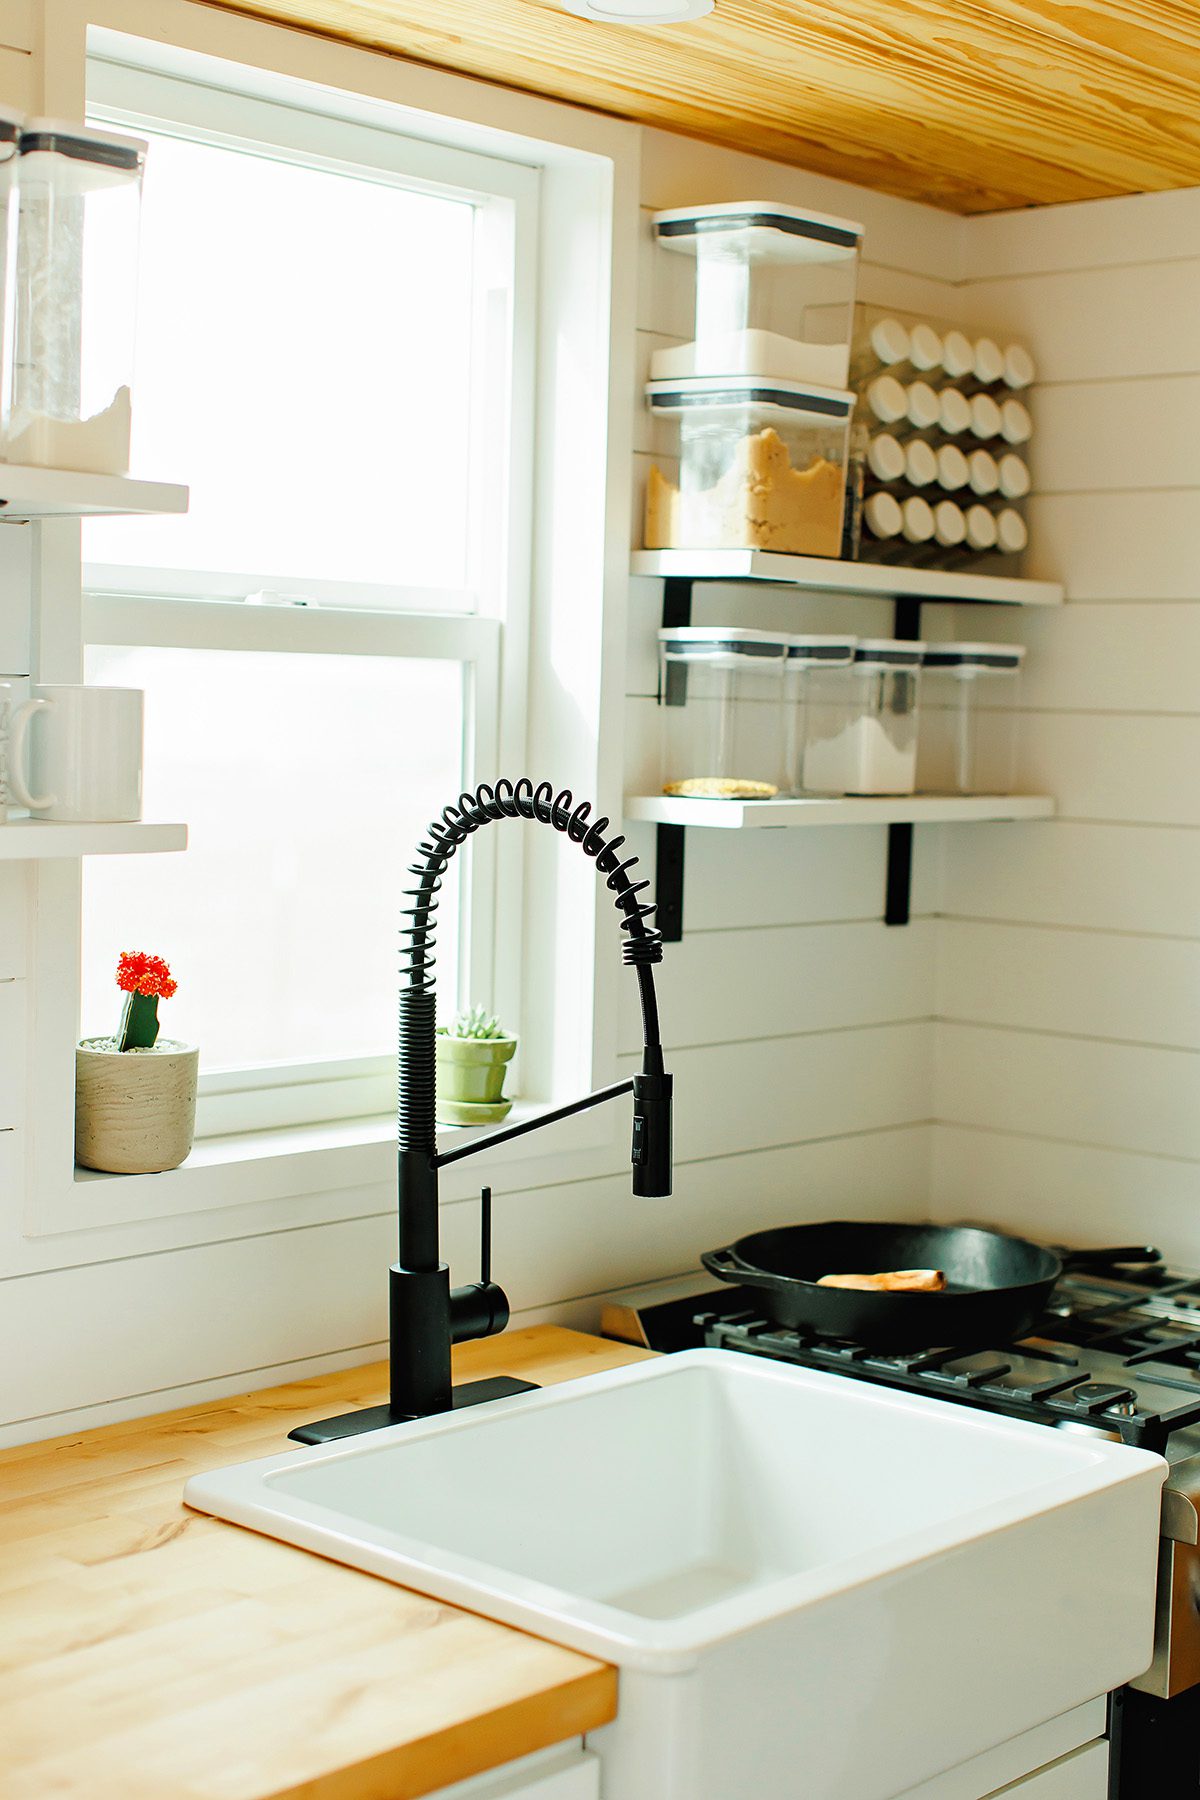 Tiny house kitchen sink in Dripping Springs Texas